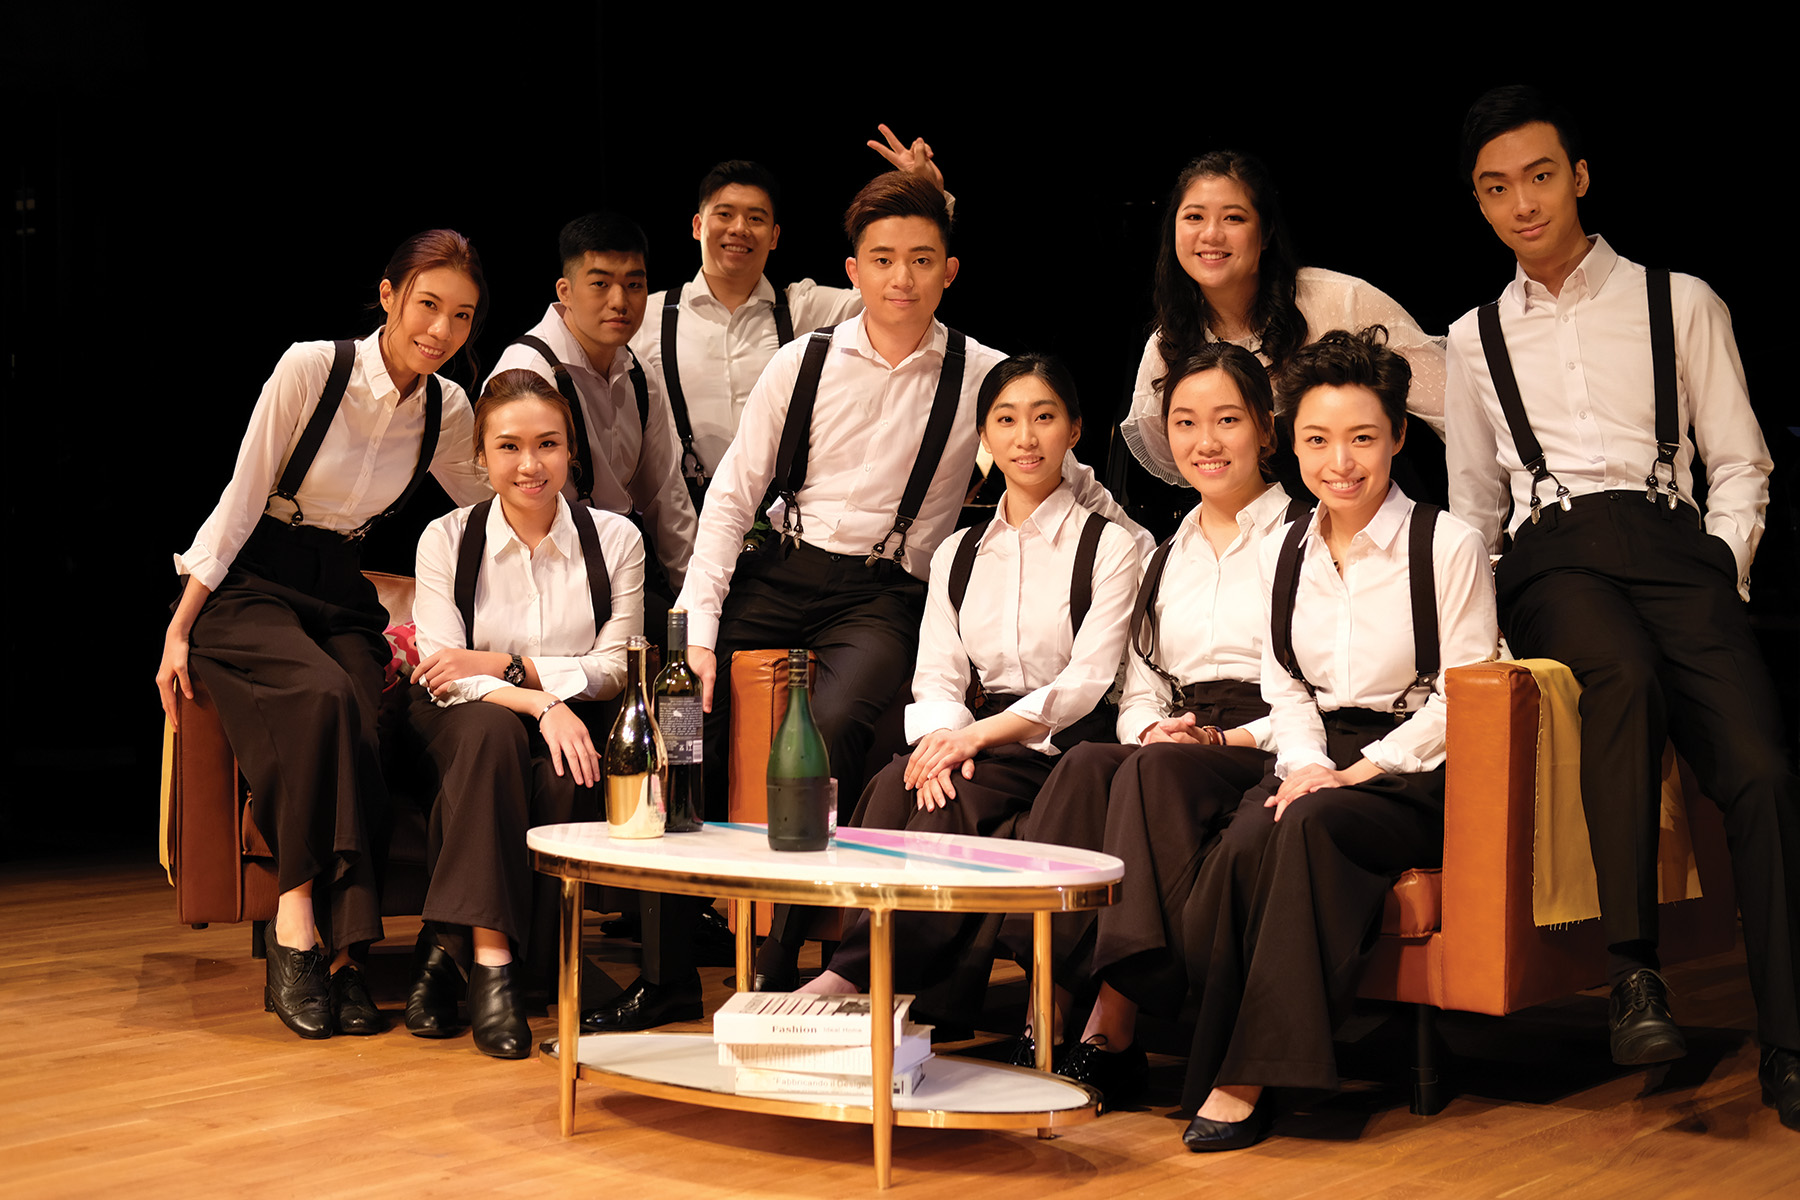 Bel Canto Singers: “My Beloved” – by Giacomo Puccini: The Ensemble with Liù. Photo credit: © David Quah